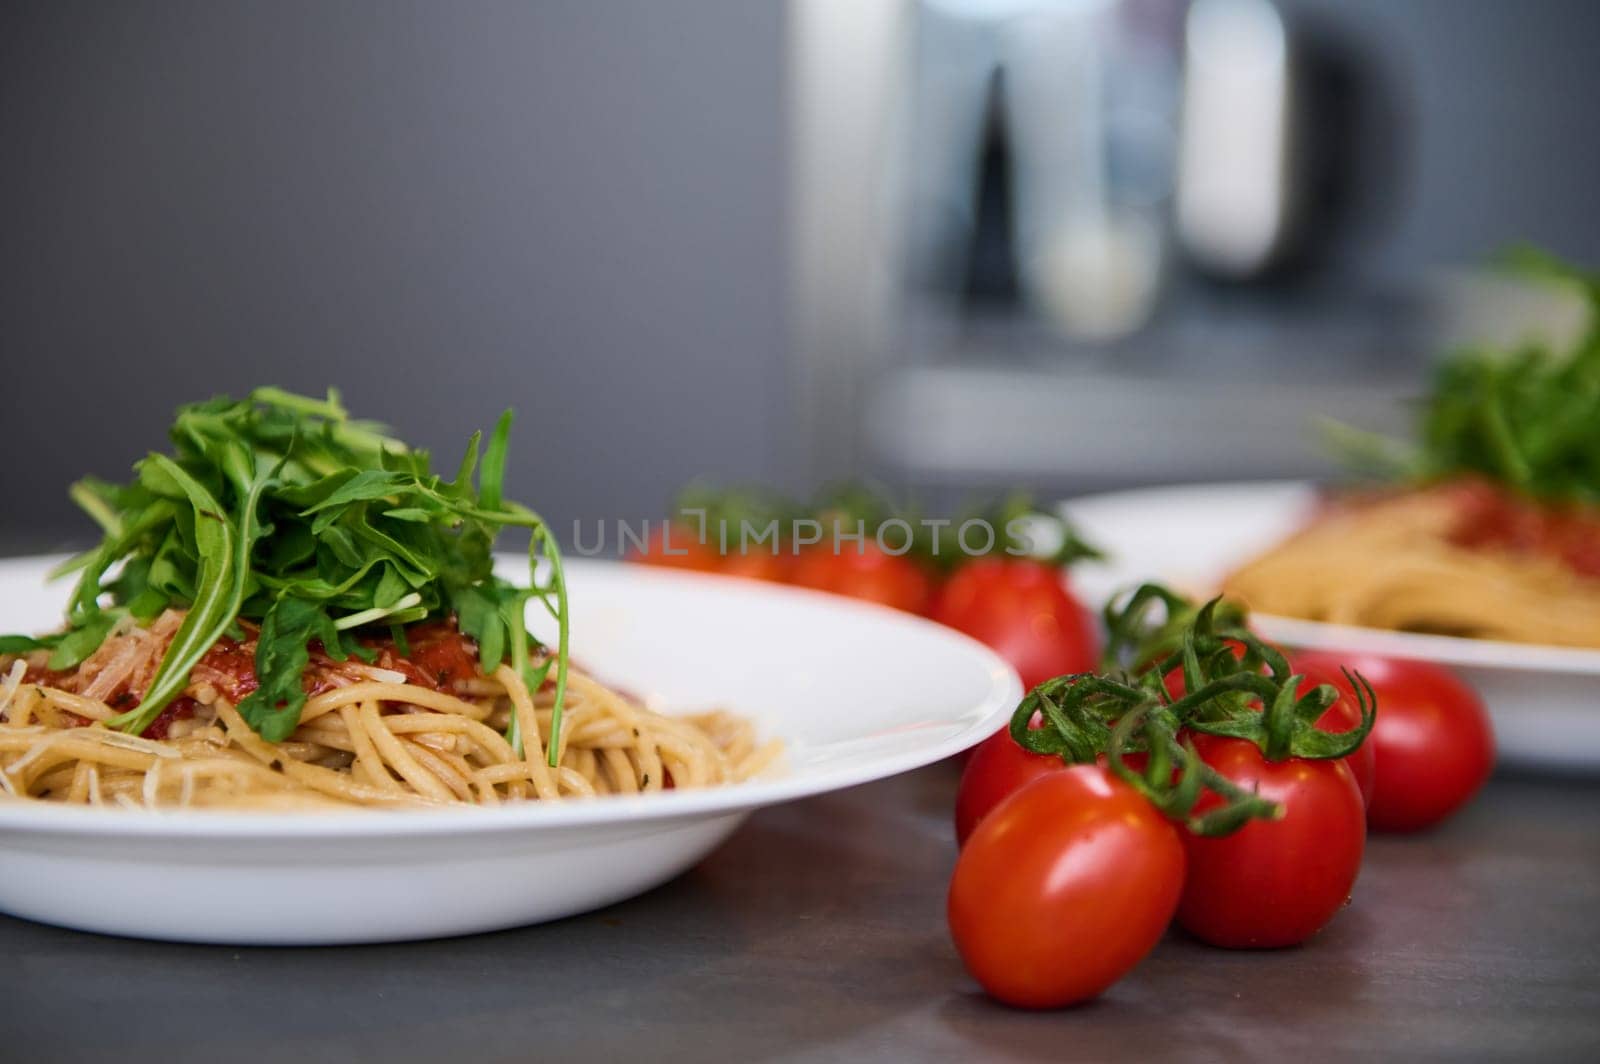 A served dish with delicious Italian pasta with tomato sauce, seasoned with fresh arugula leaves and grated parmesan cheese on pasta in white plate. Decoration of dish. Italian cuisine. Food backdrop